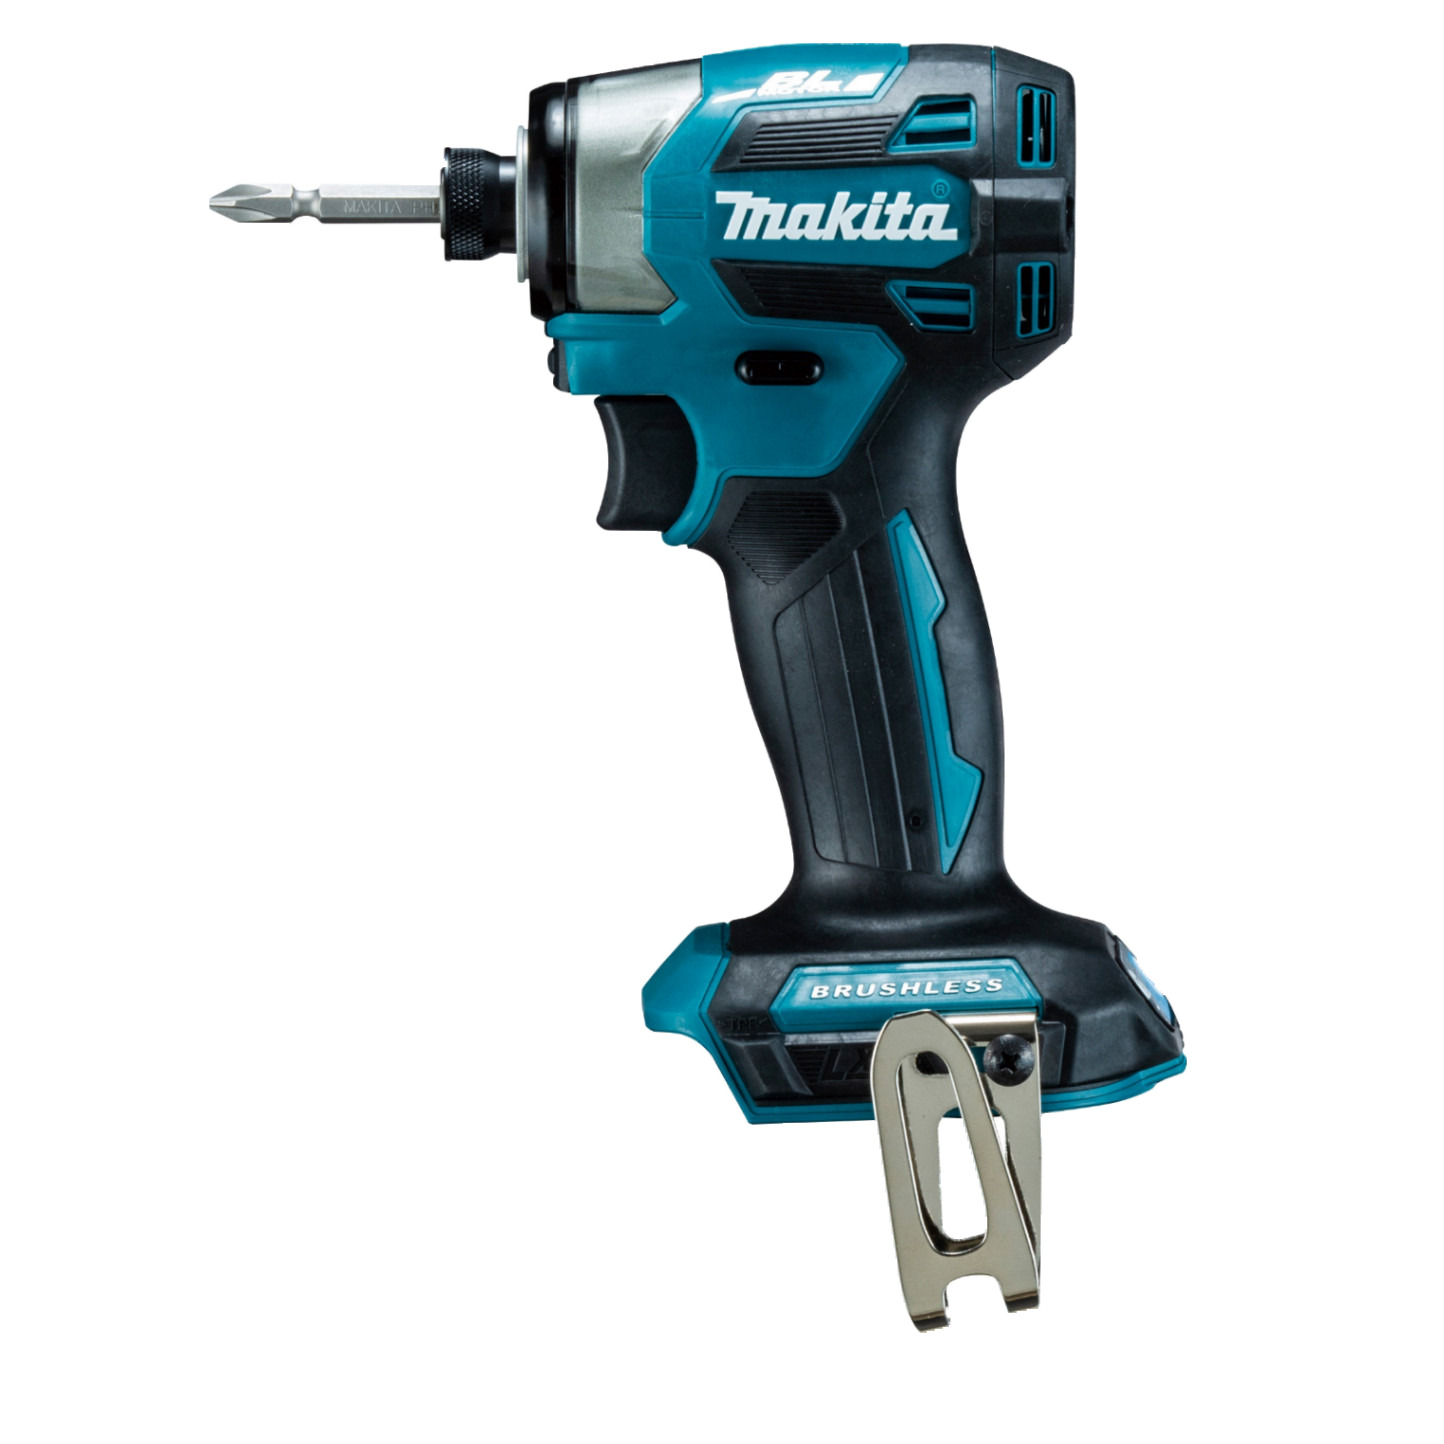 Makita TD173DZ Impact Driver 18V  Body Only 5 colors to choose